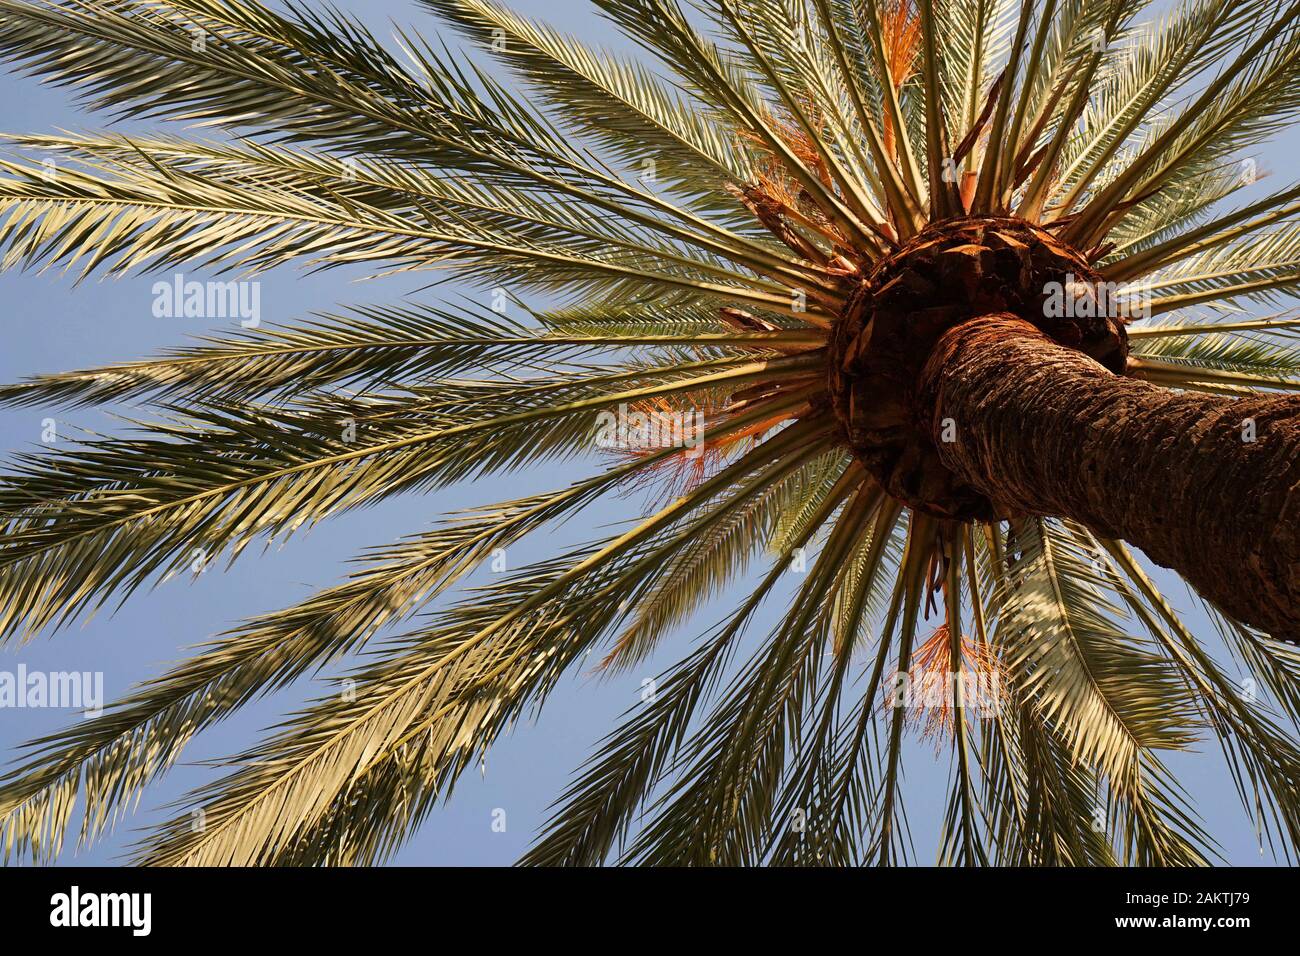 Looking upwards at a bright colourful palm tree and leaves Stock Photo